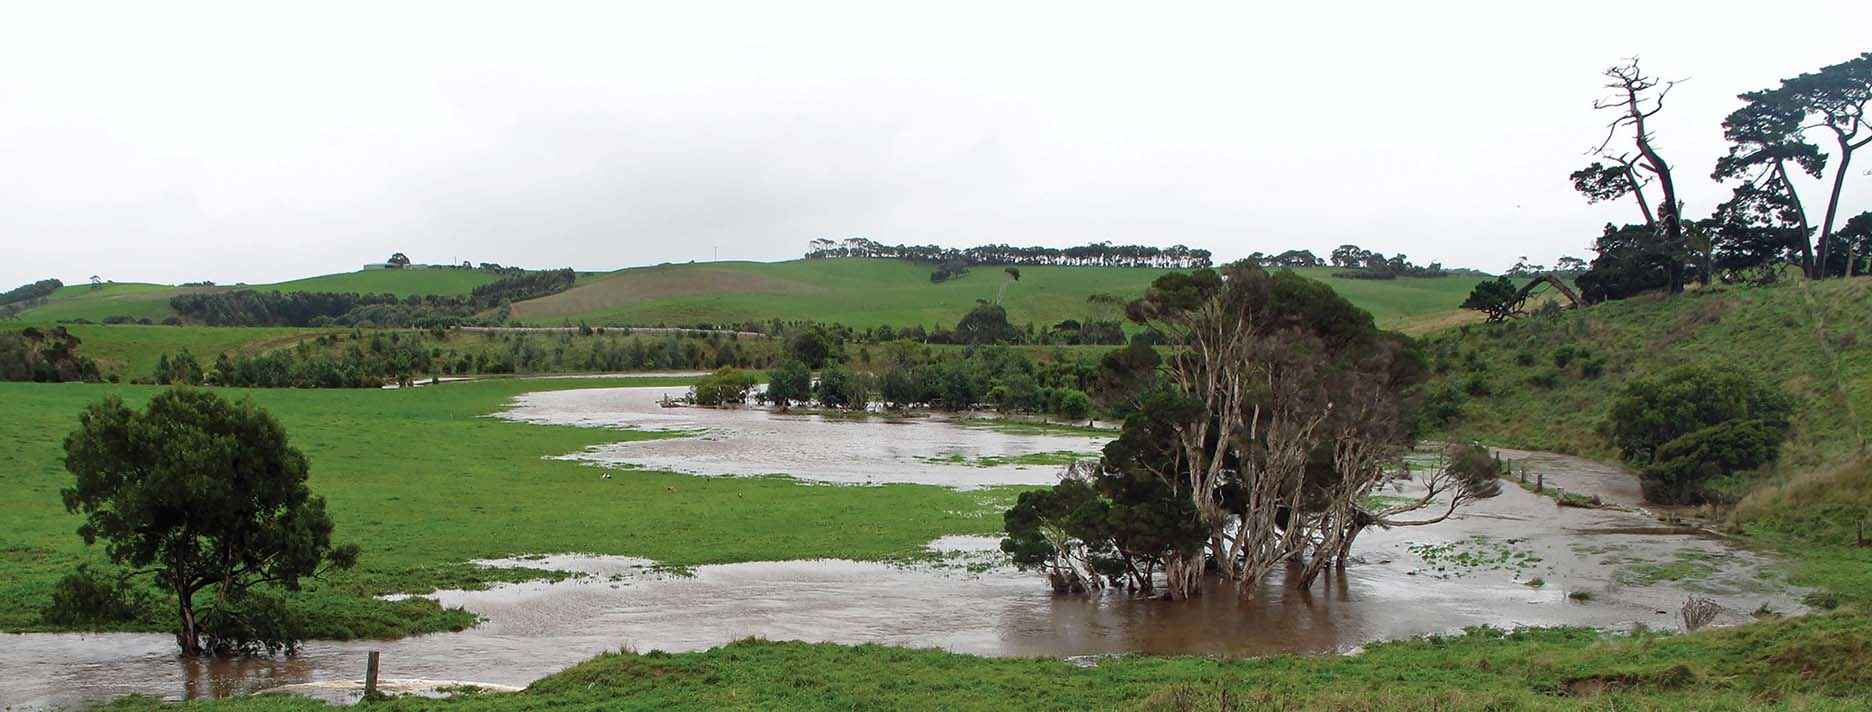 Revegetation work undertaken by the Fish Creek Landcare Group helped to reduce erosion in the floods of April 2011.